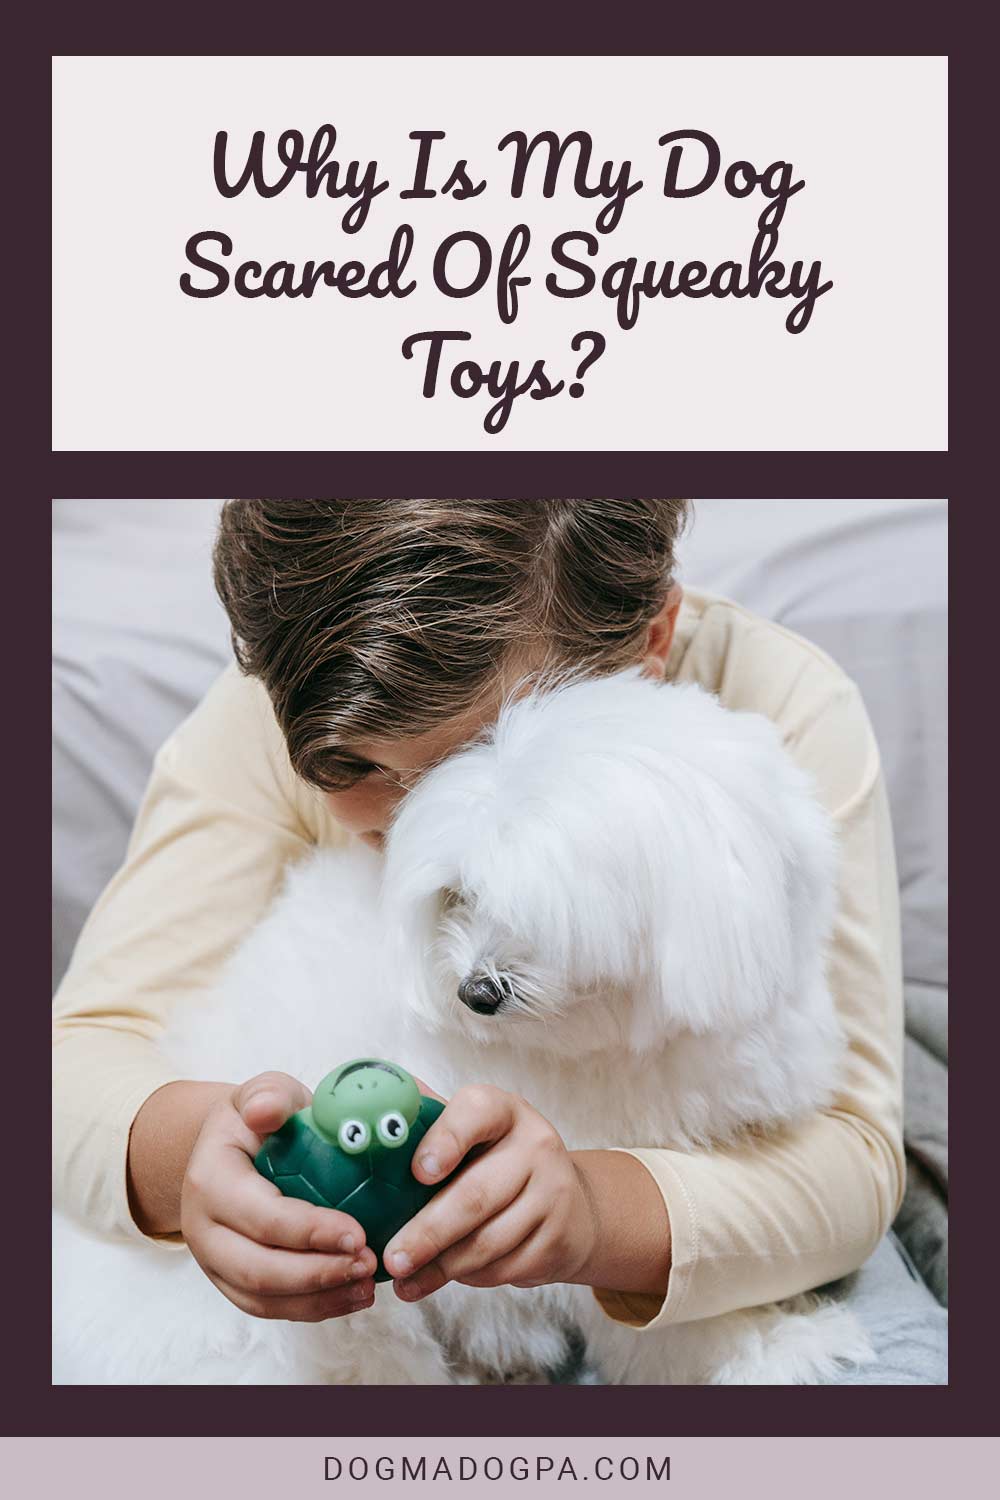 Boy with a dog on his lap plating with a toy - Why Is My Dog Scared Of Squeaky Toys?